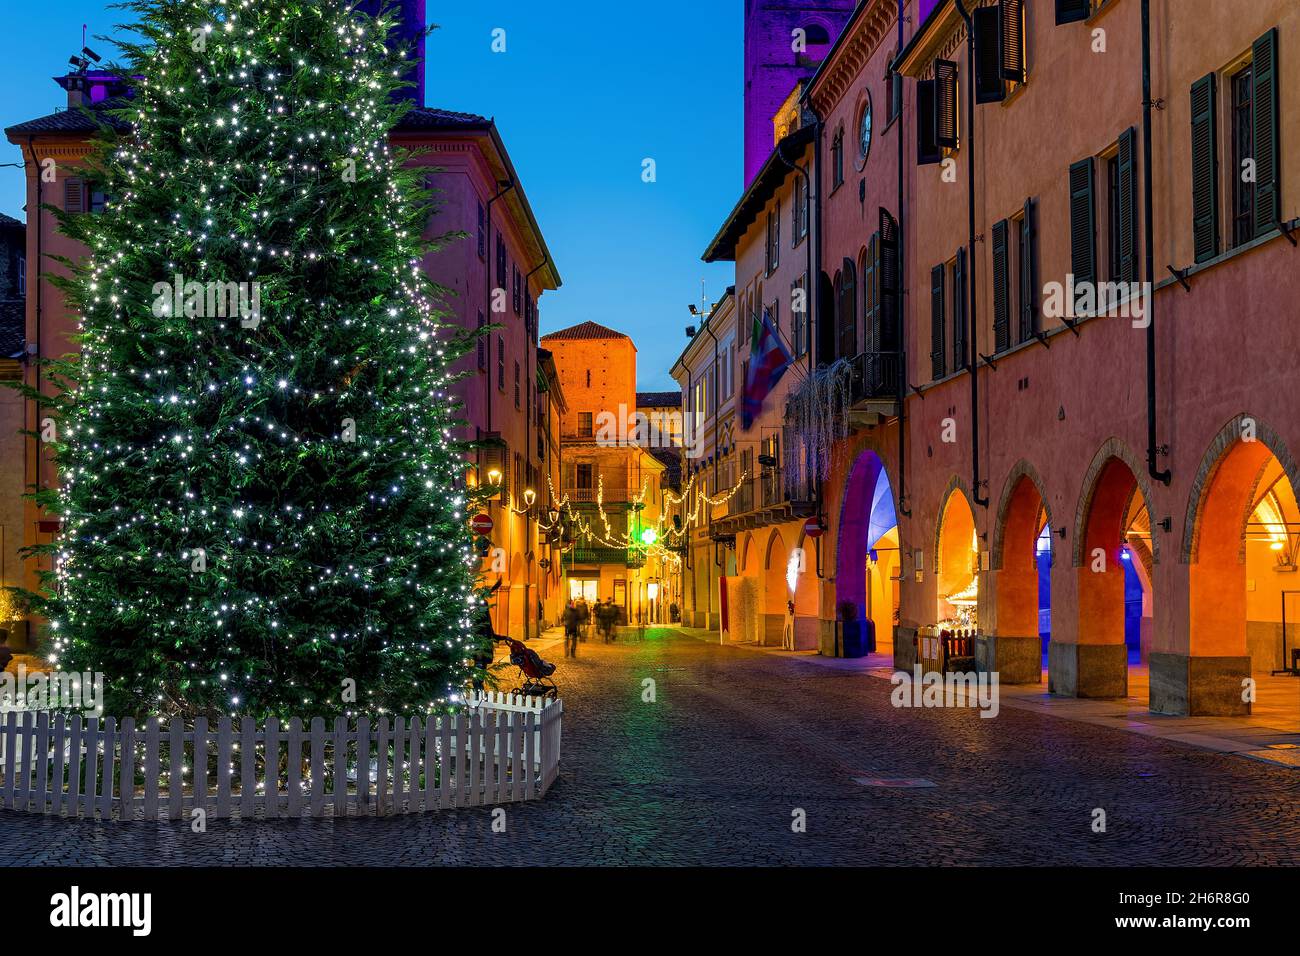 Illuminated Christmas tree on town square and cobblestone street among historic buildings in the evening in Alba, Piedmont, Northern Italy. Stock Photo